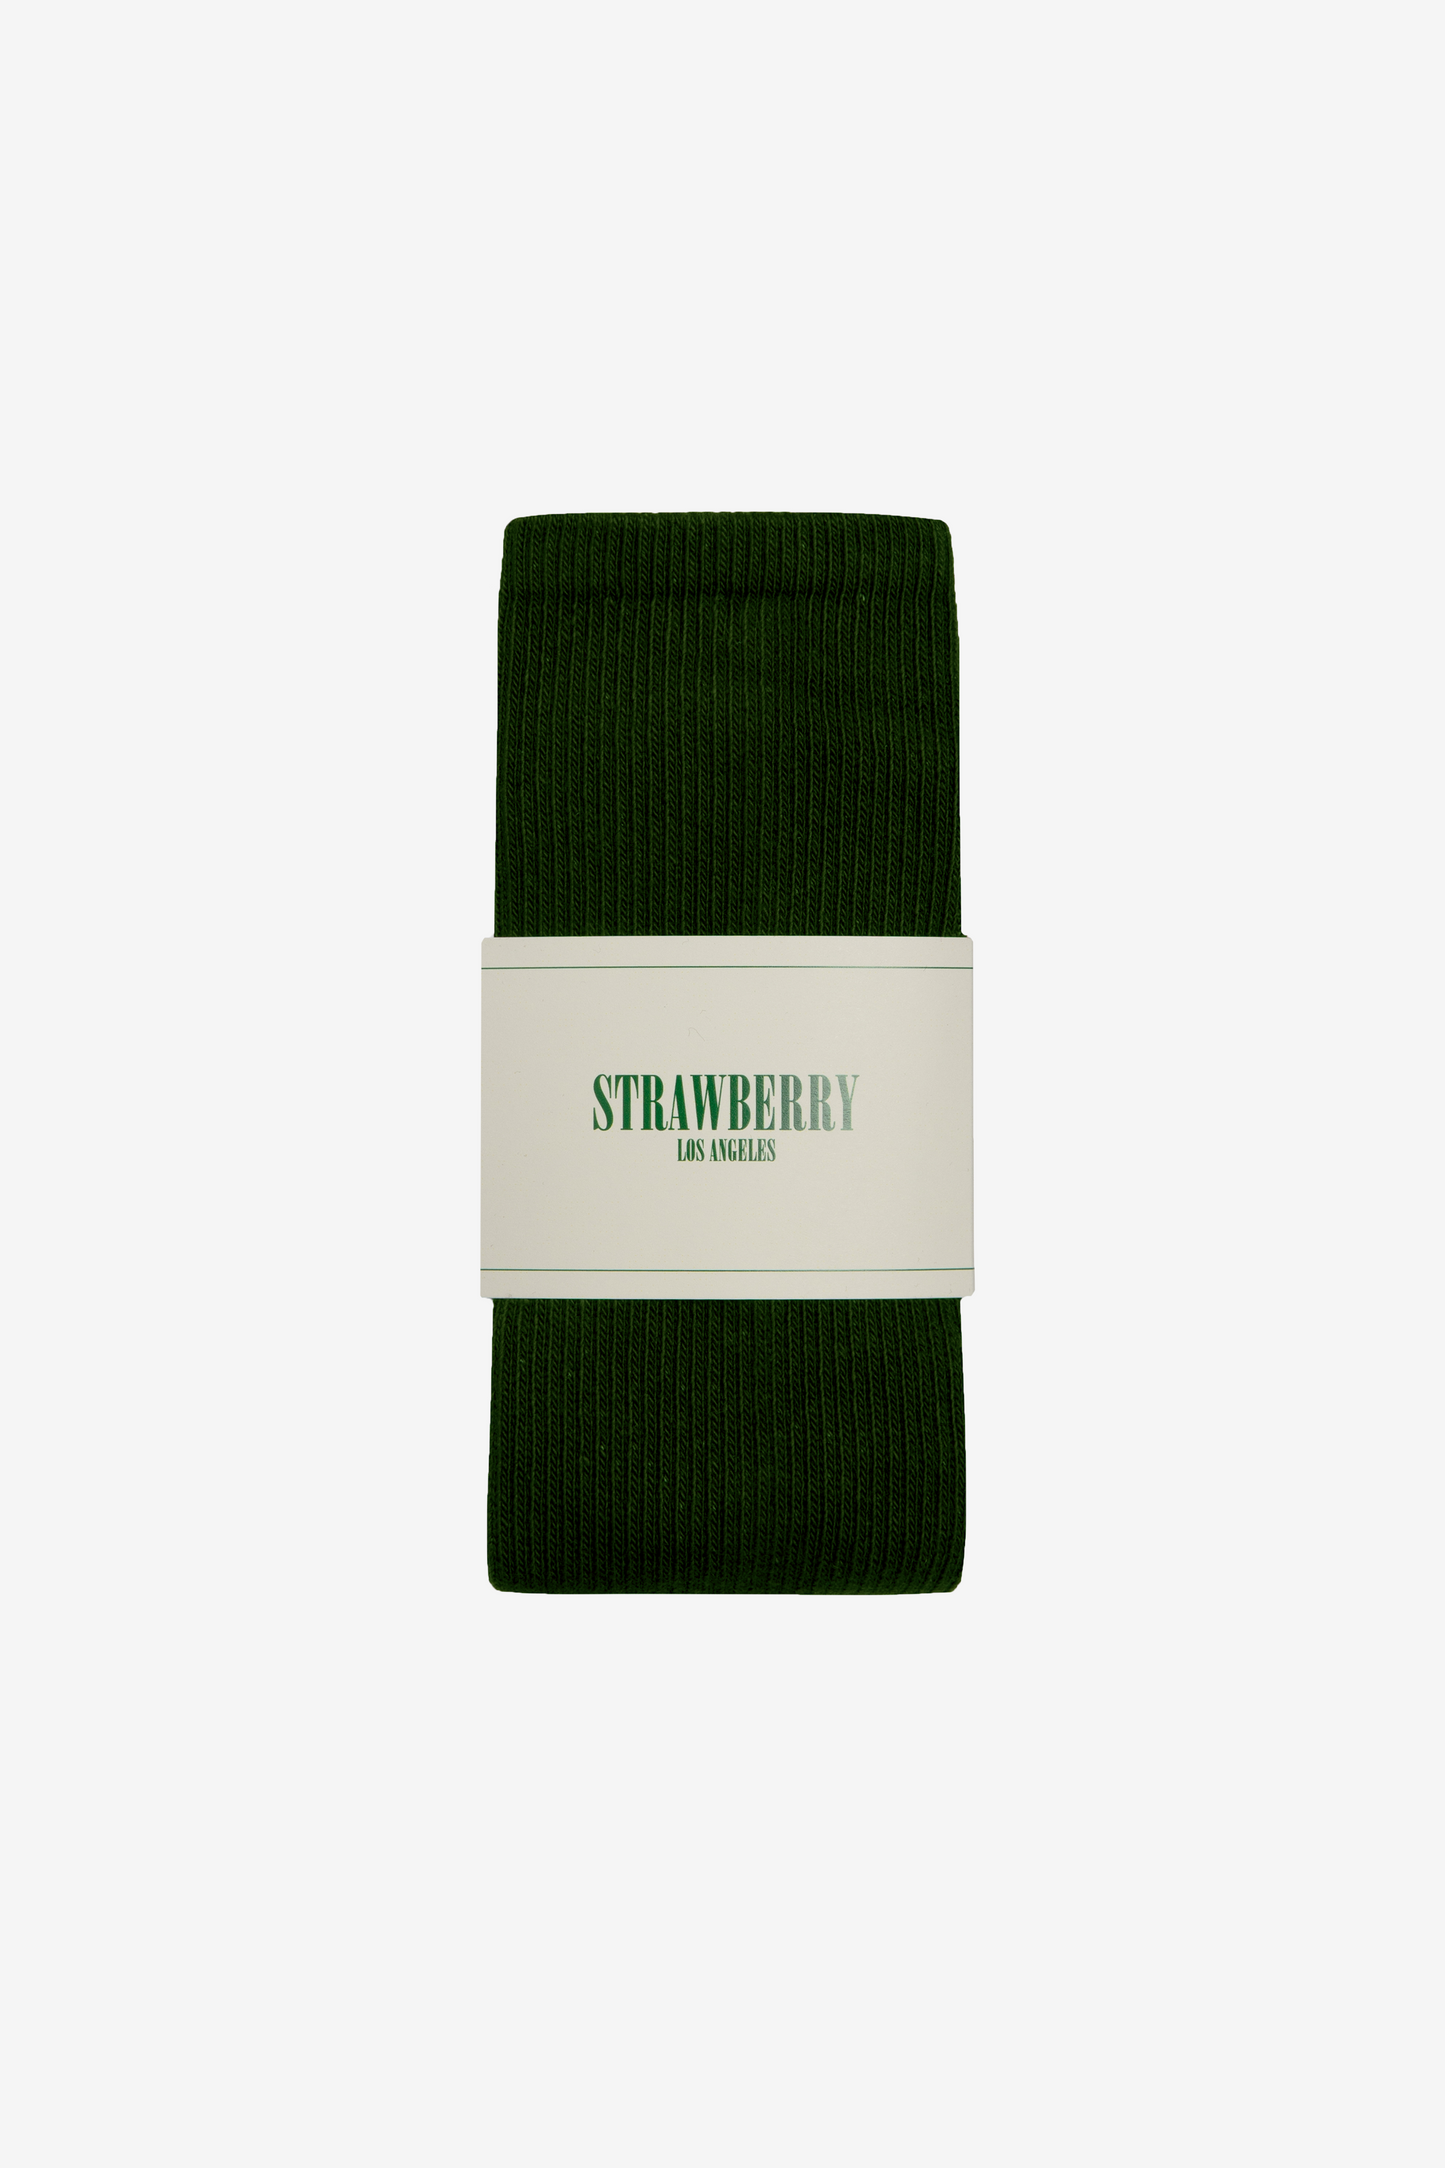 Crew Sock - Forest